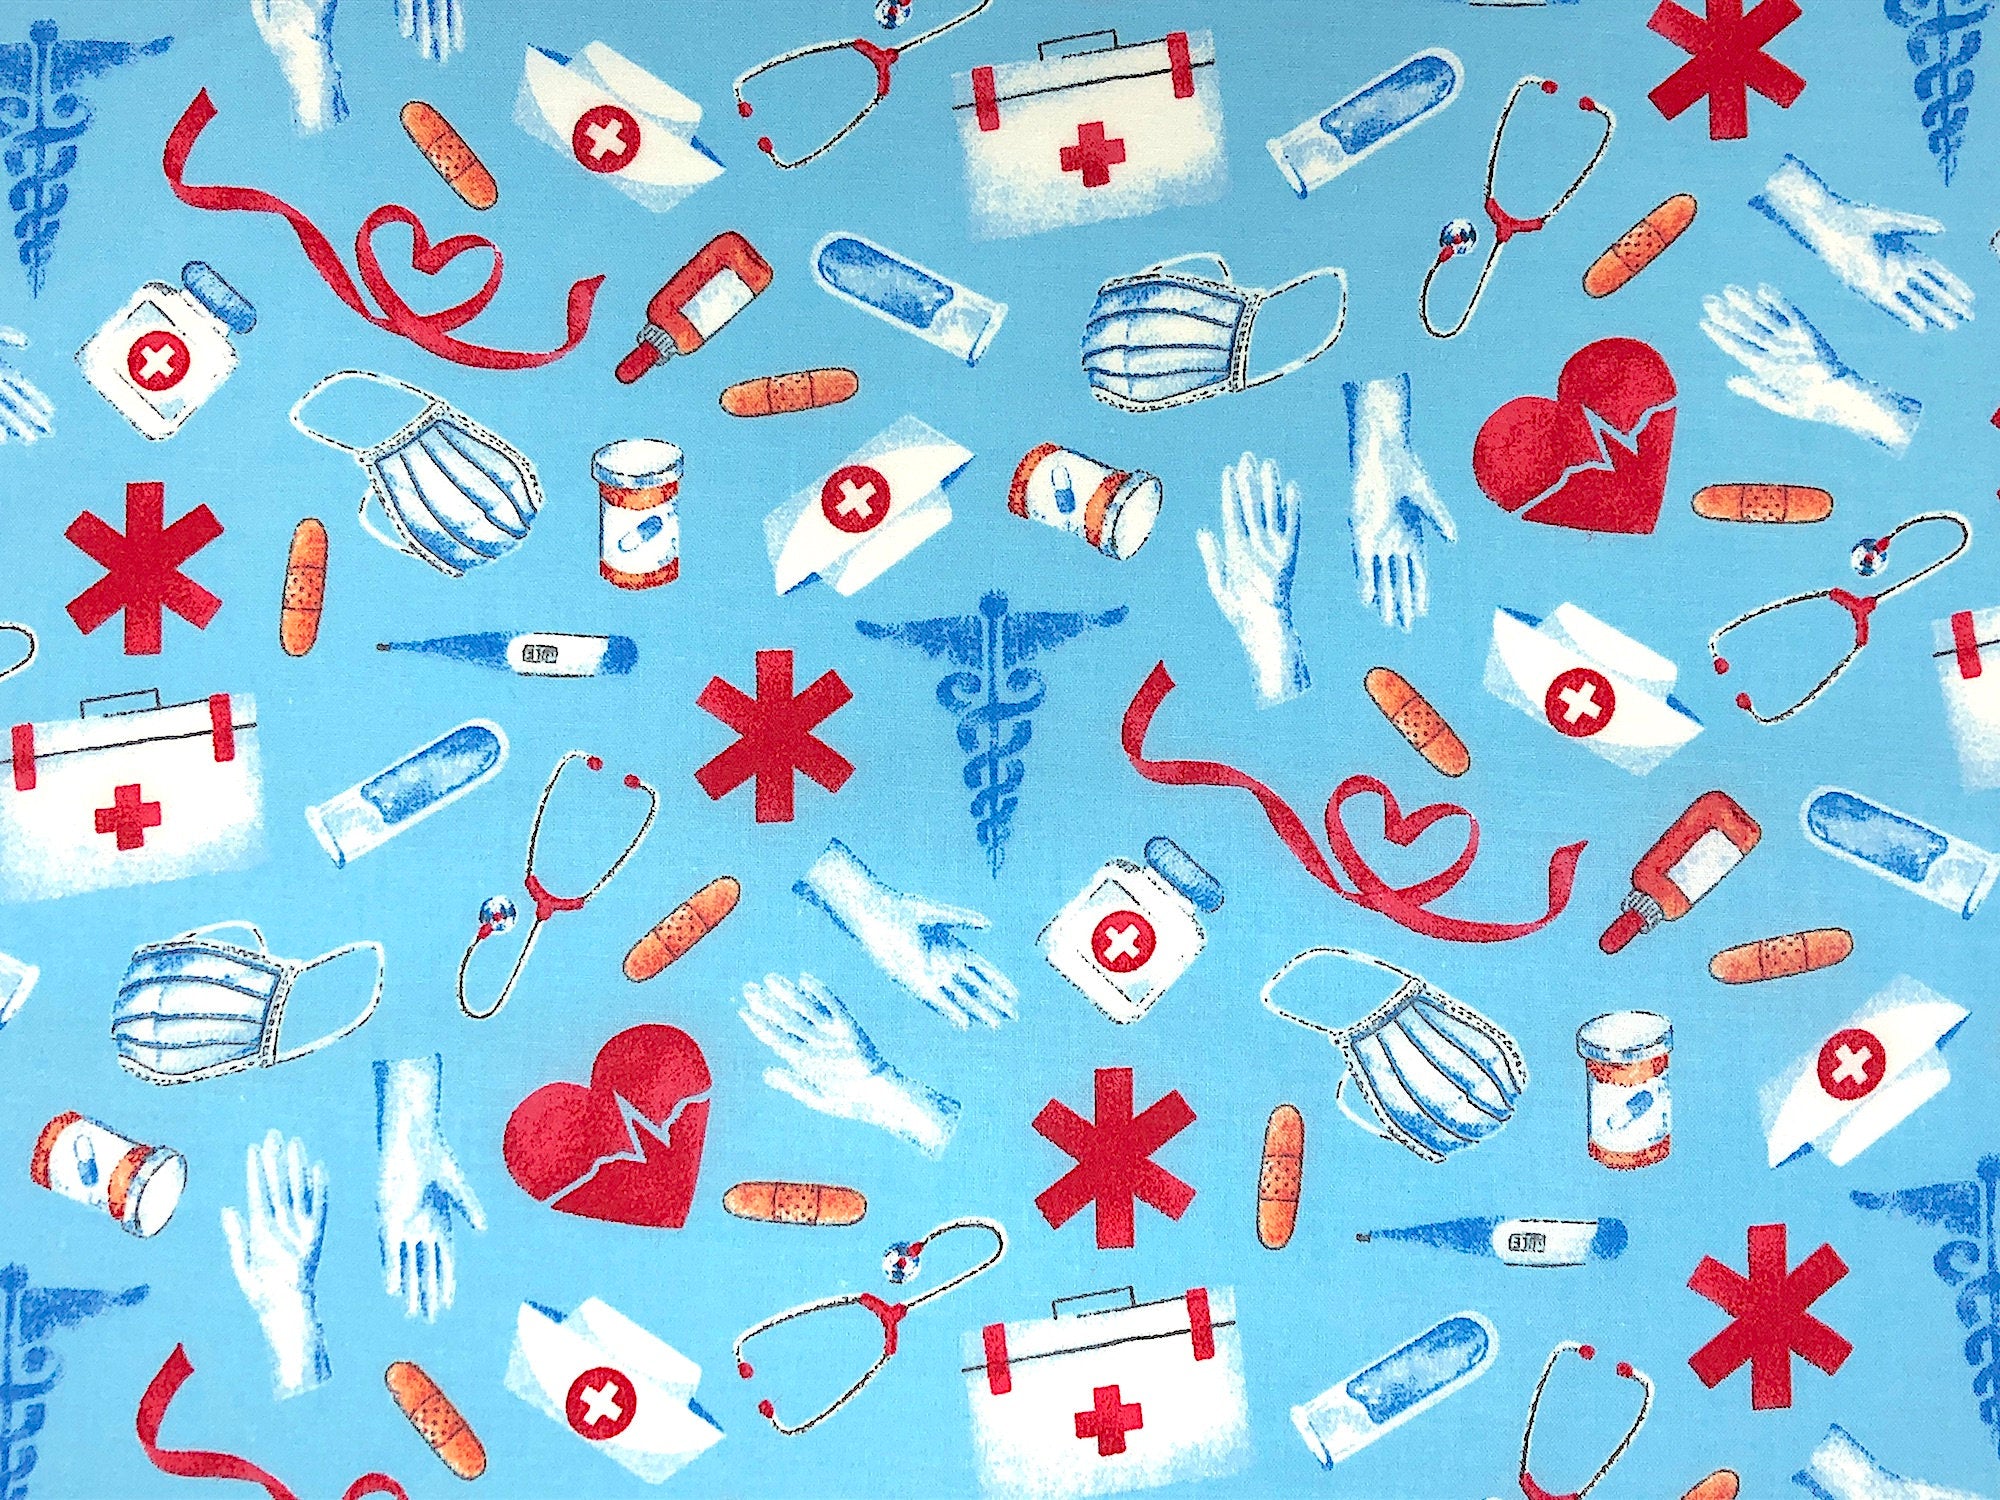 Medical Themed Fabric - Tribute - Nurse Fabric - Cotton Fabric - Quilting Fabric - Fabric Traditions - MISC-81